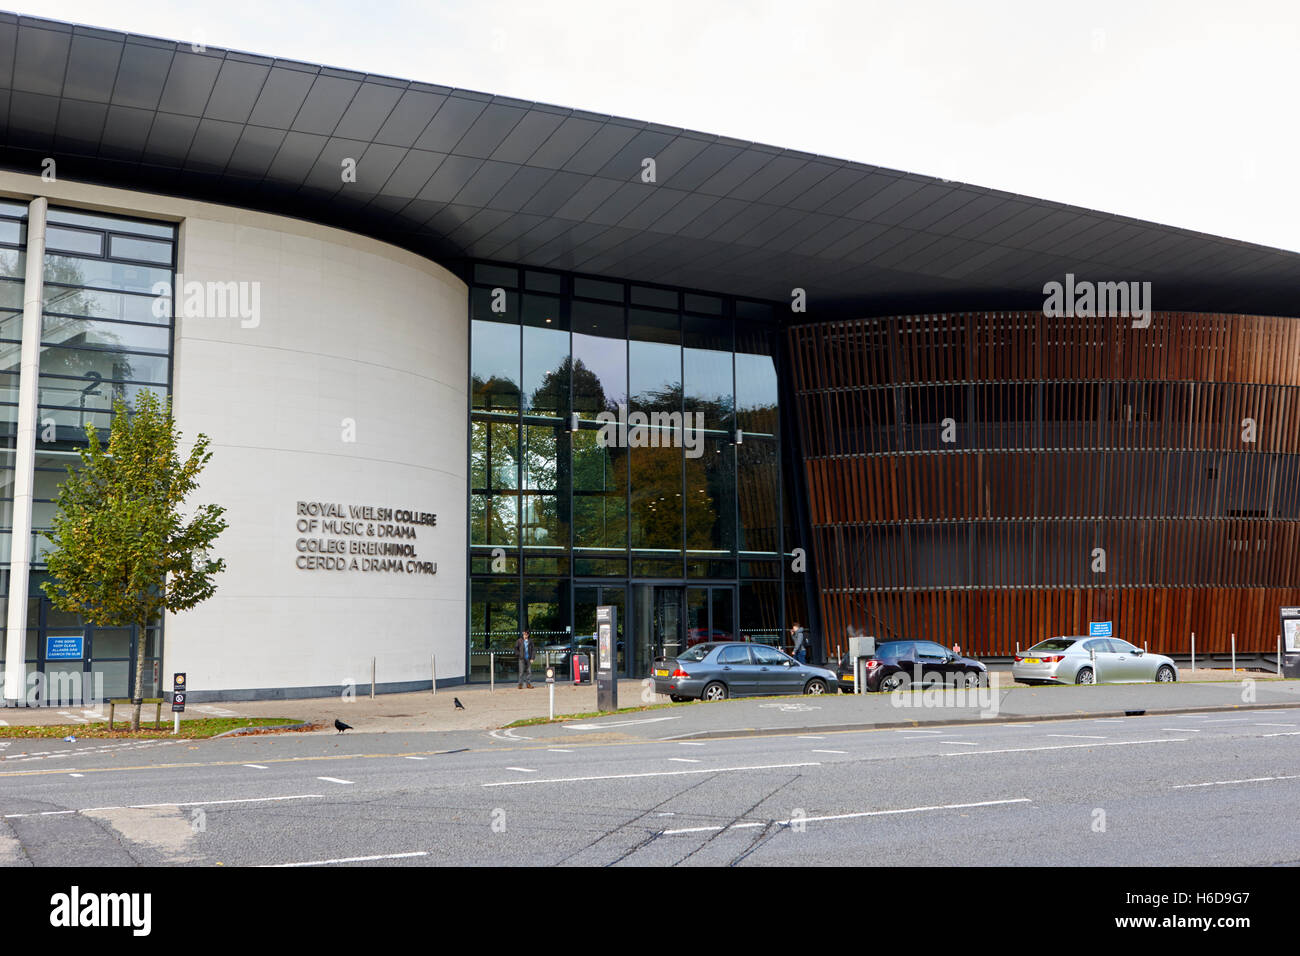 Royal Welsh College of Music and Drama Cardiff Wales Großbritannien Stockfoto